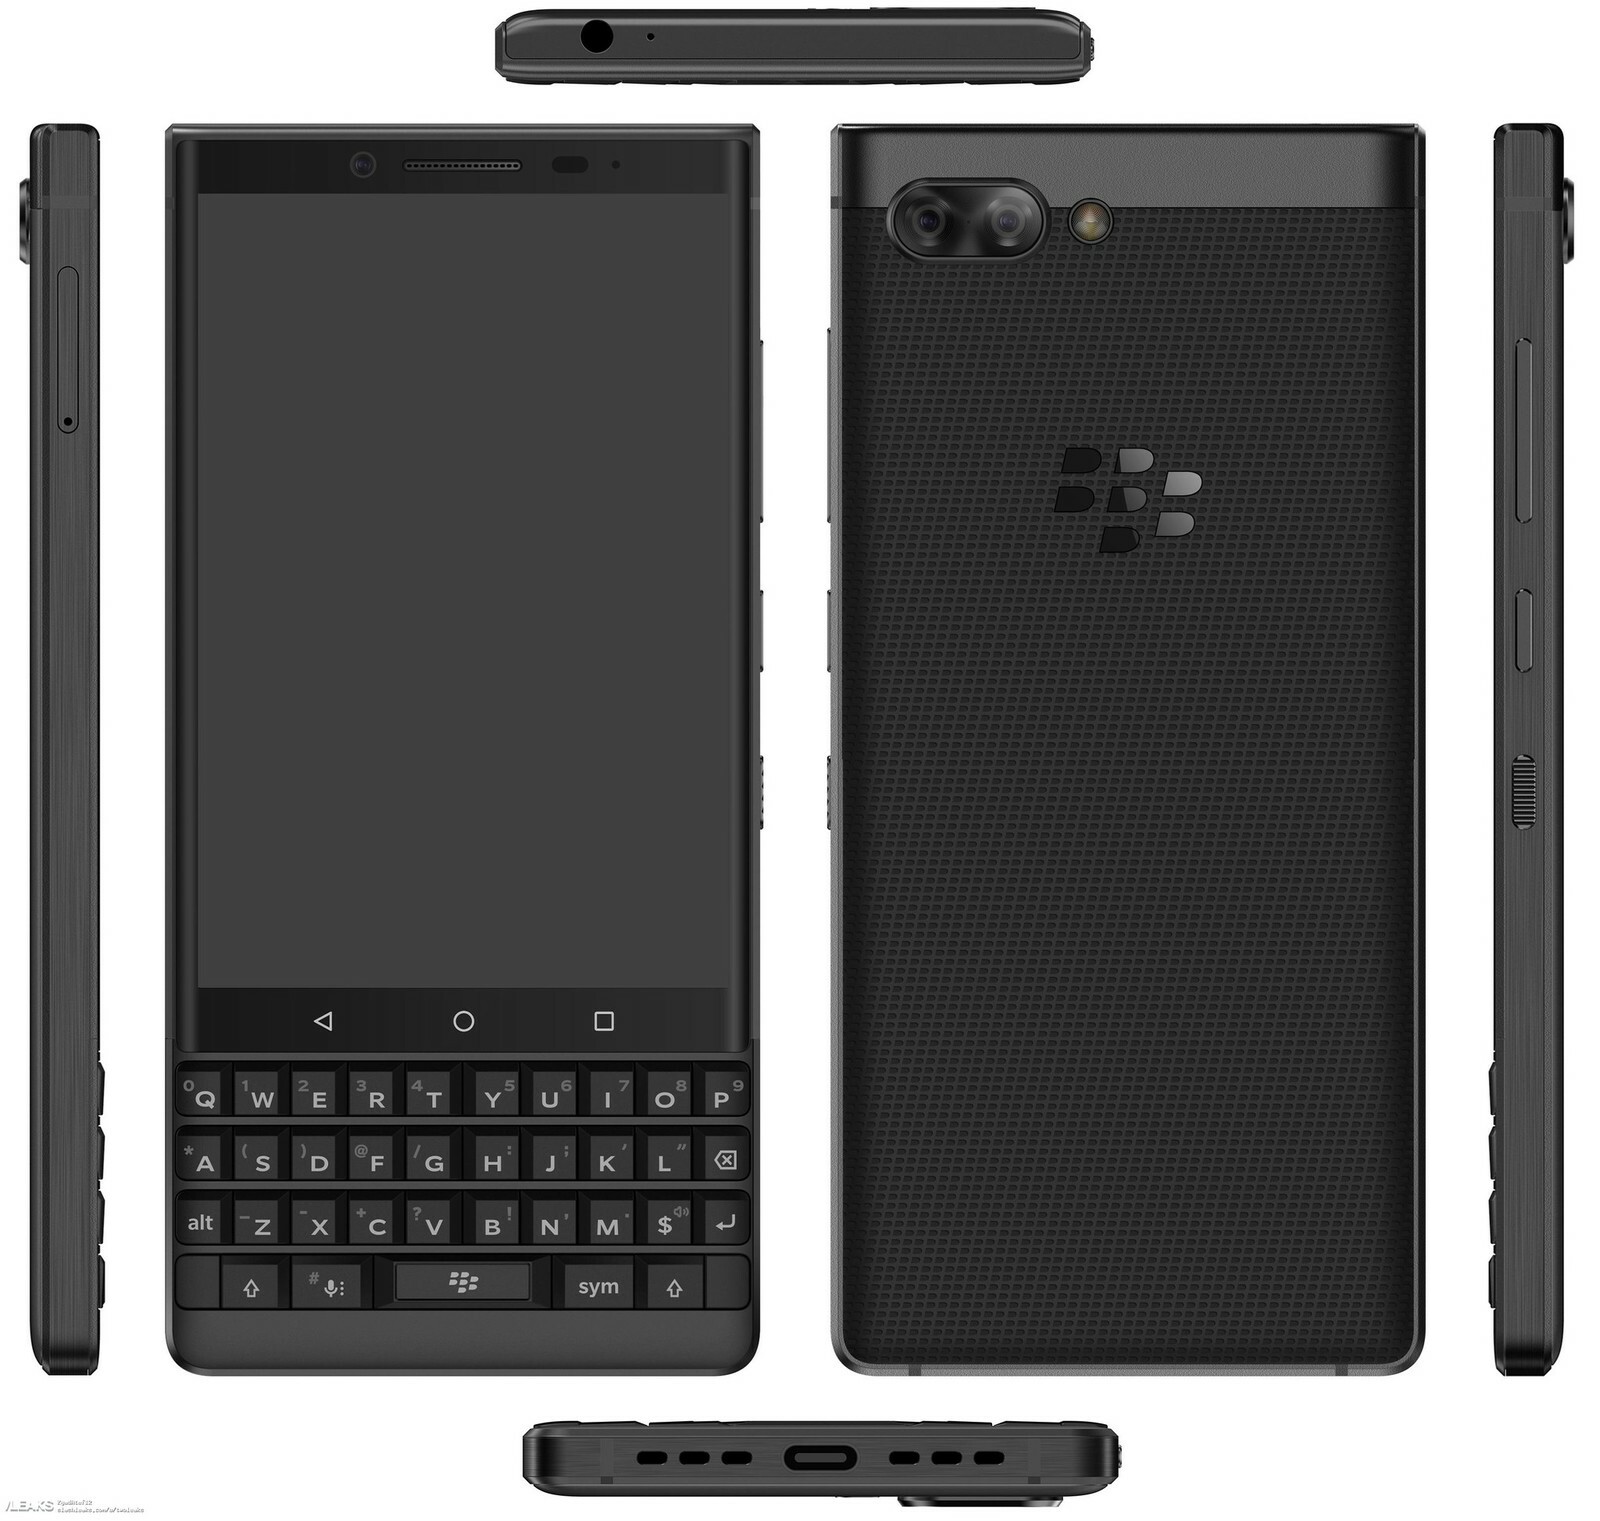 What will the BlackBerry Key2 look like?